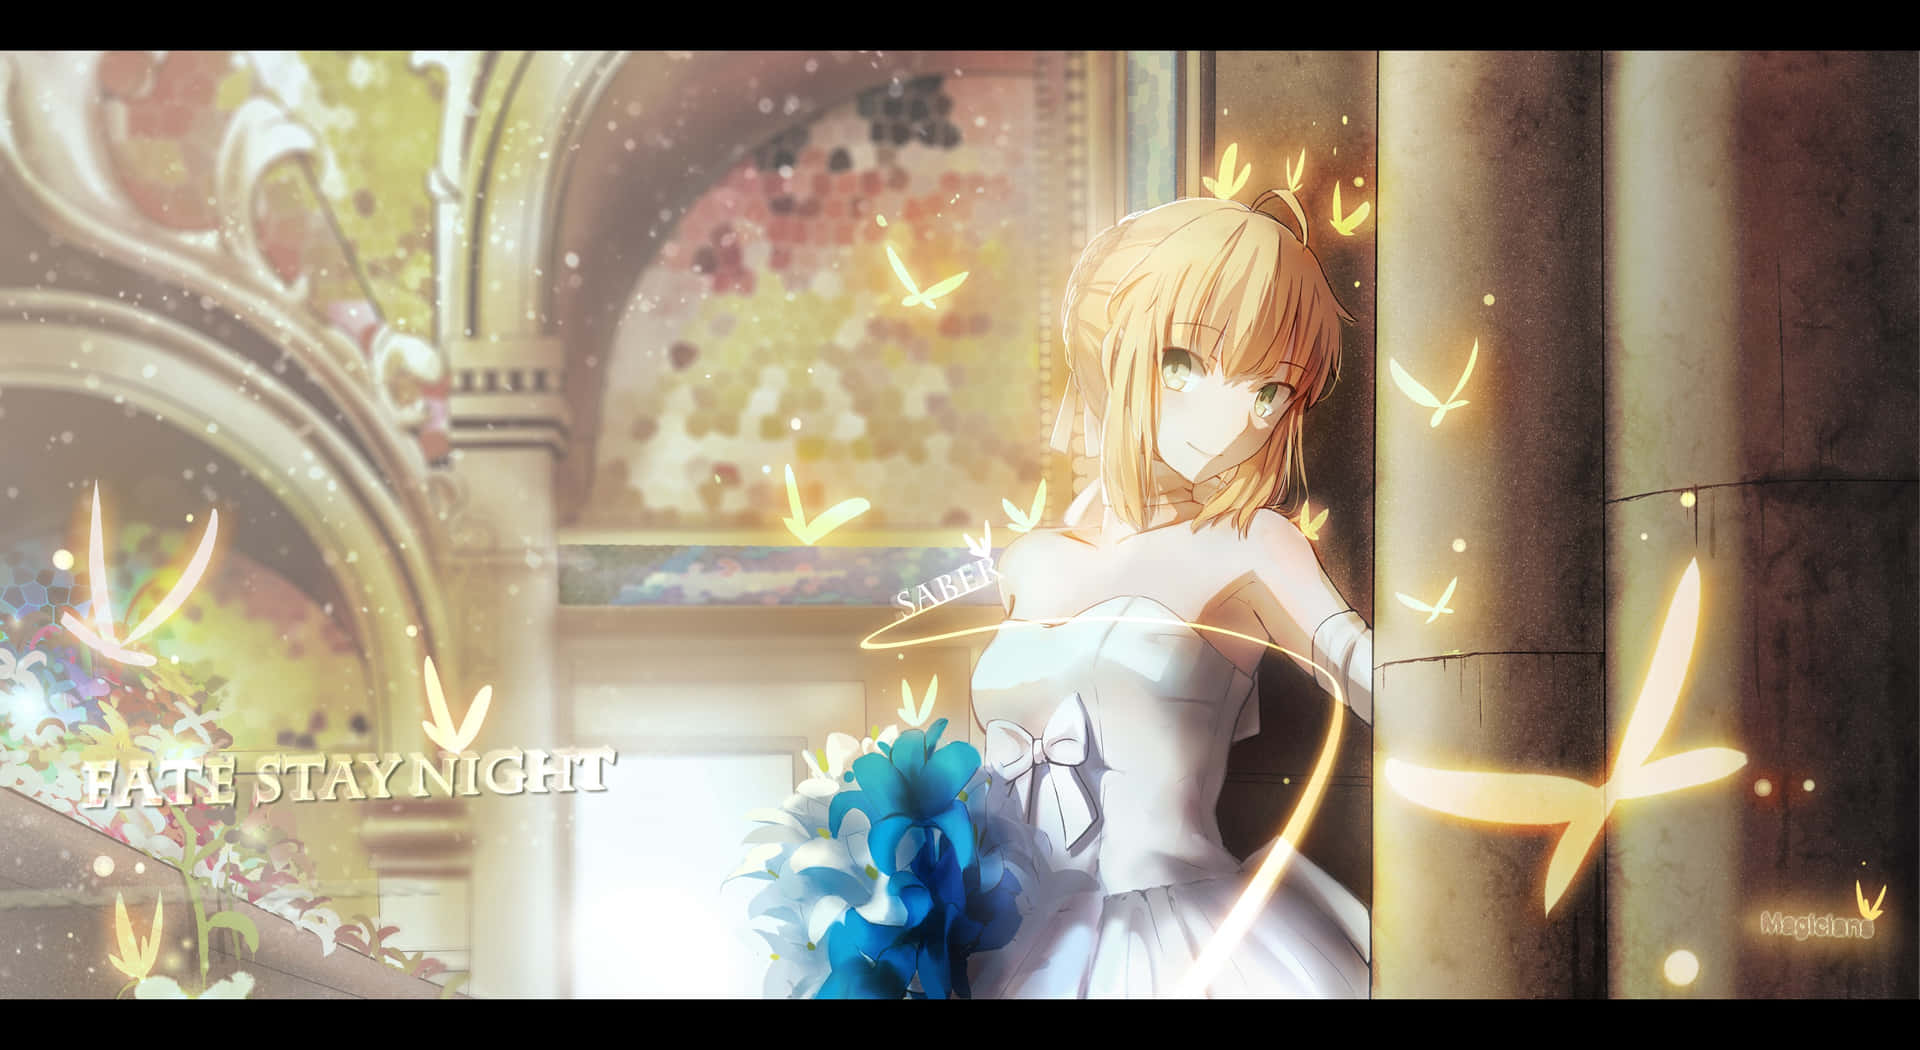 Saber Fate Stay Night With Blue Flowers Wallpaper